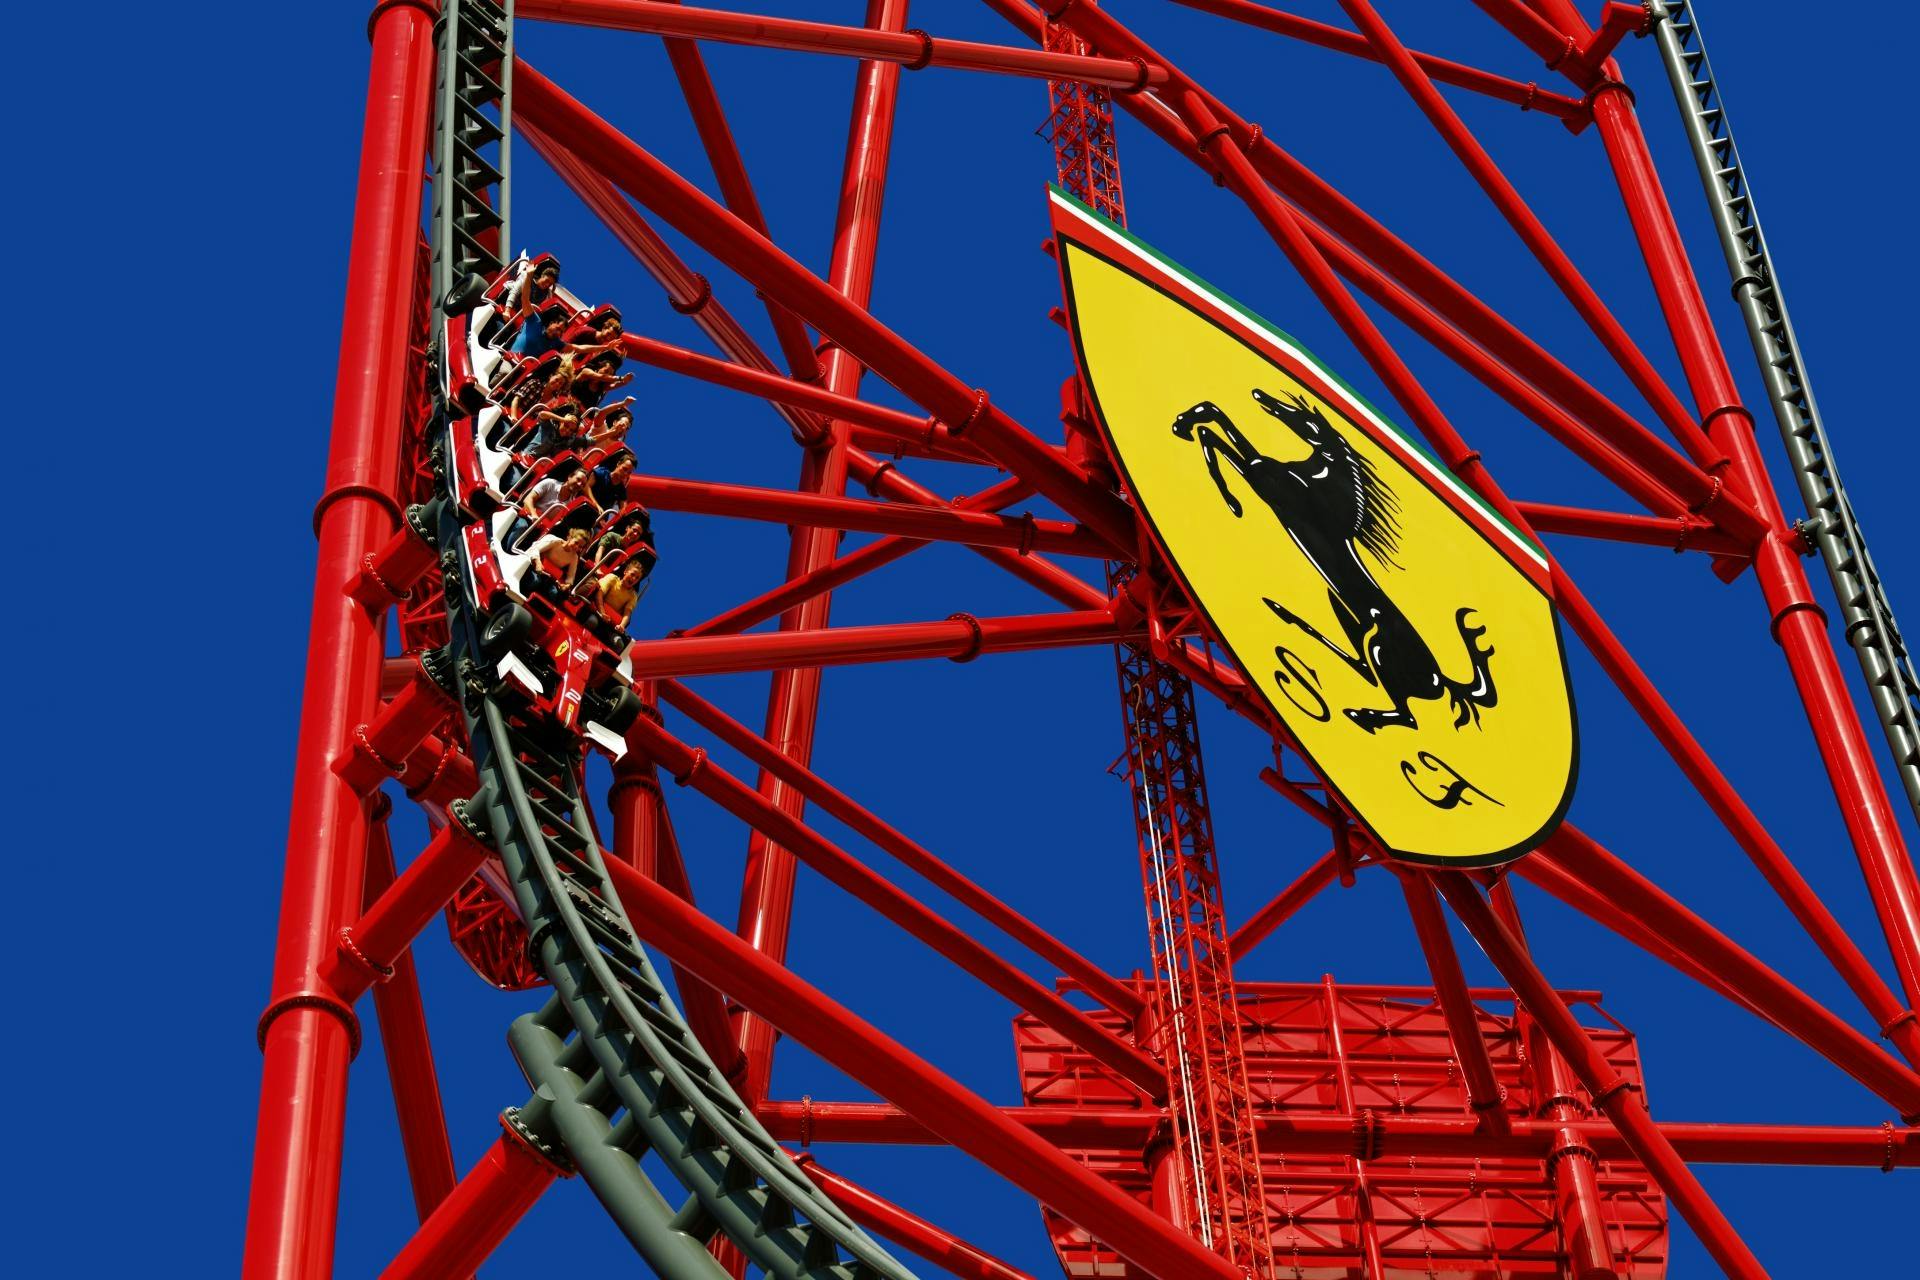 Skip-the-line tickets to PortAventura and Ferrari Land from Barcelona